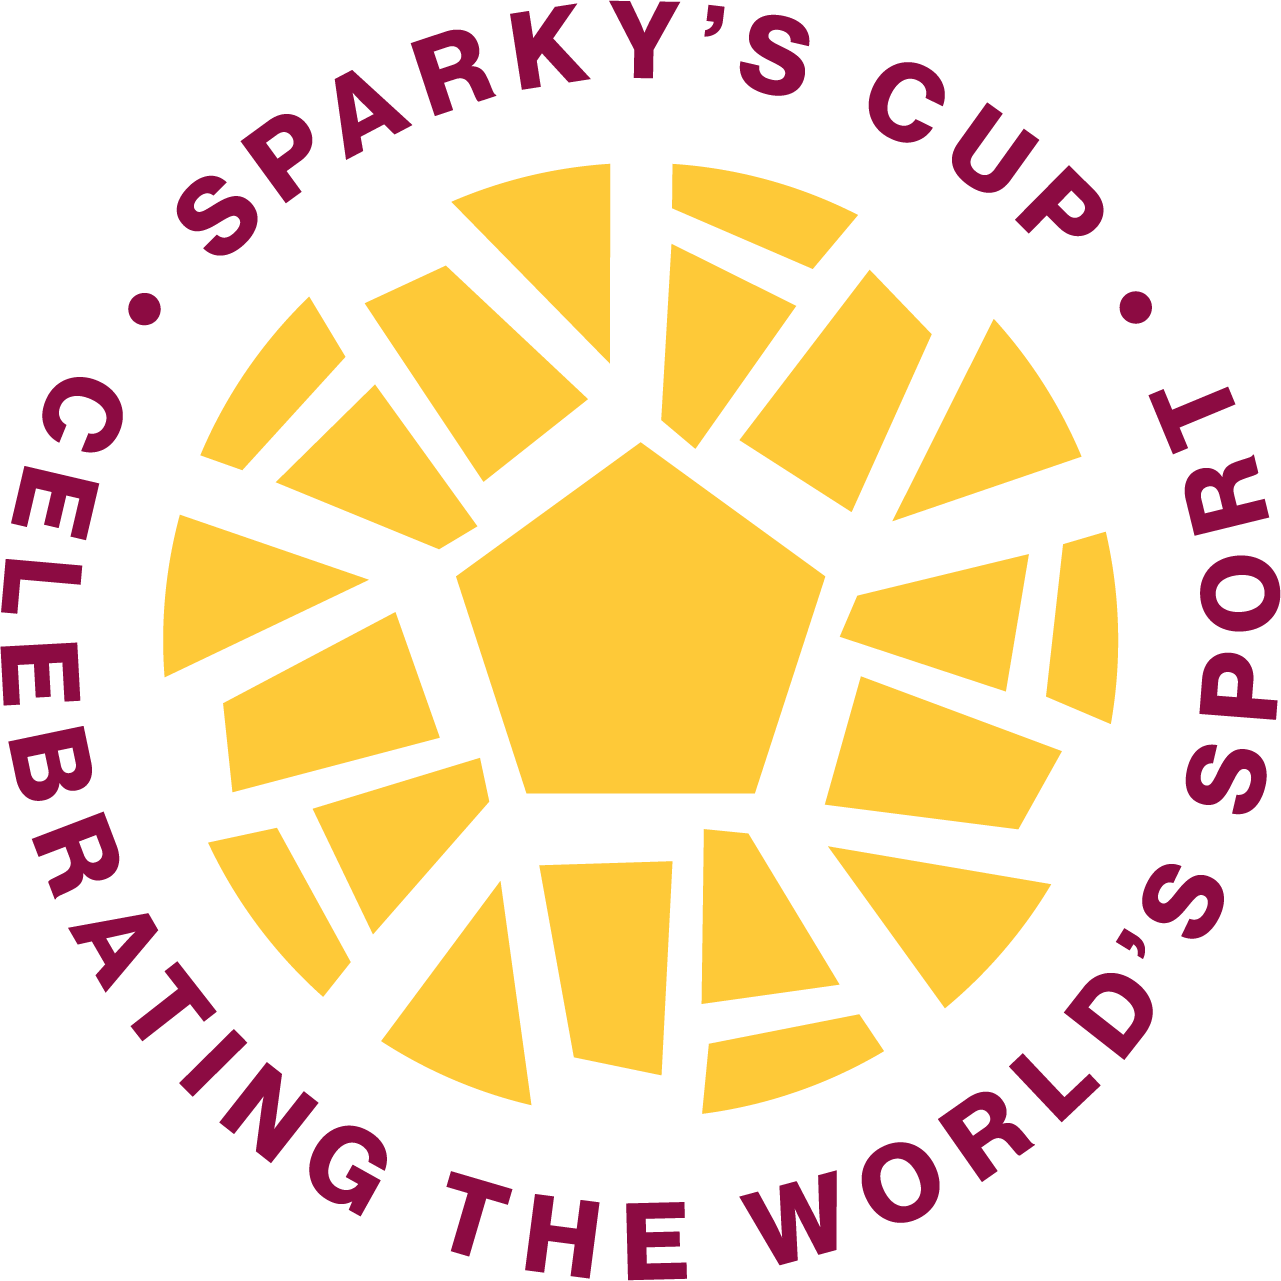 ASU Sparky's cup graphic